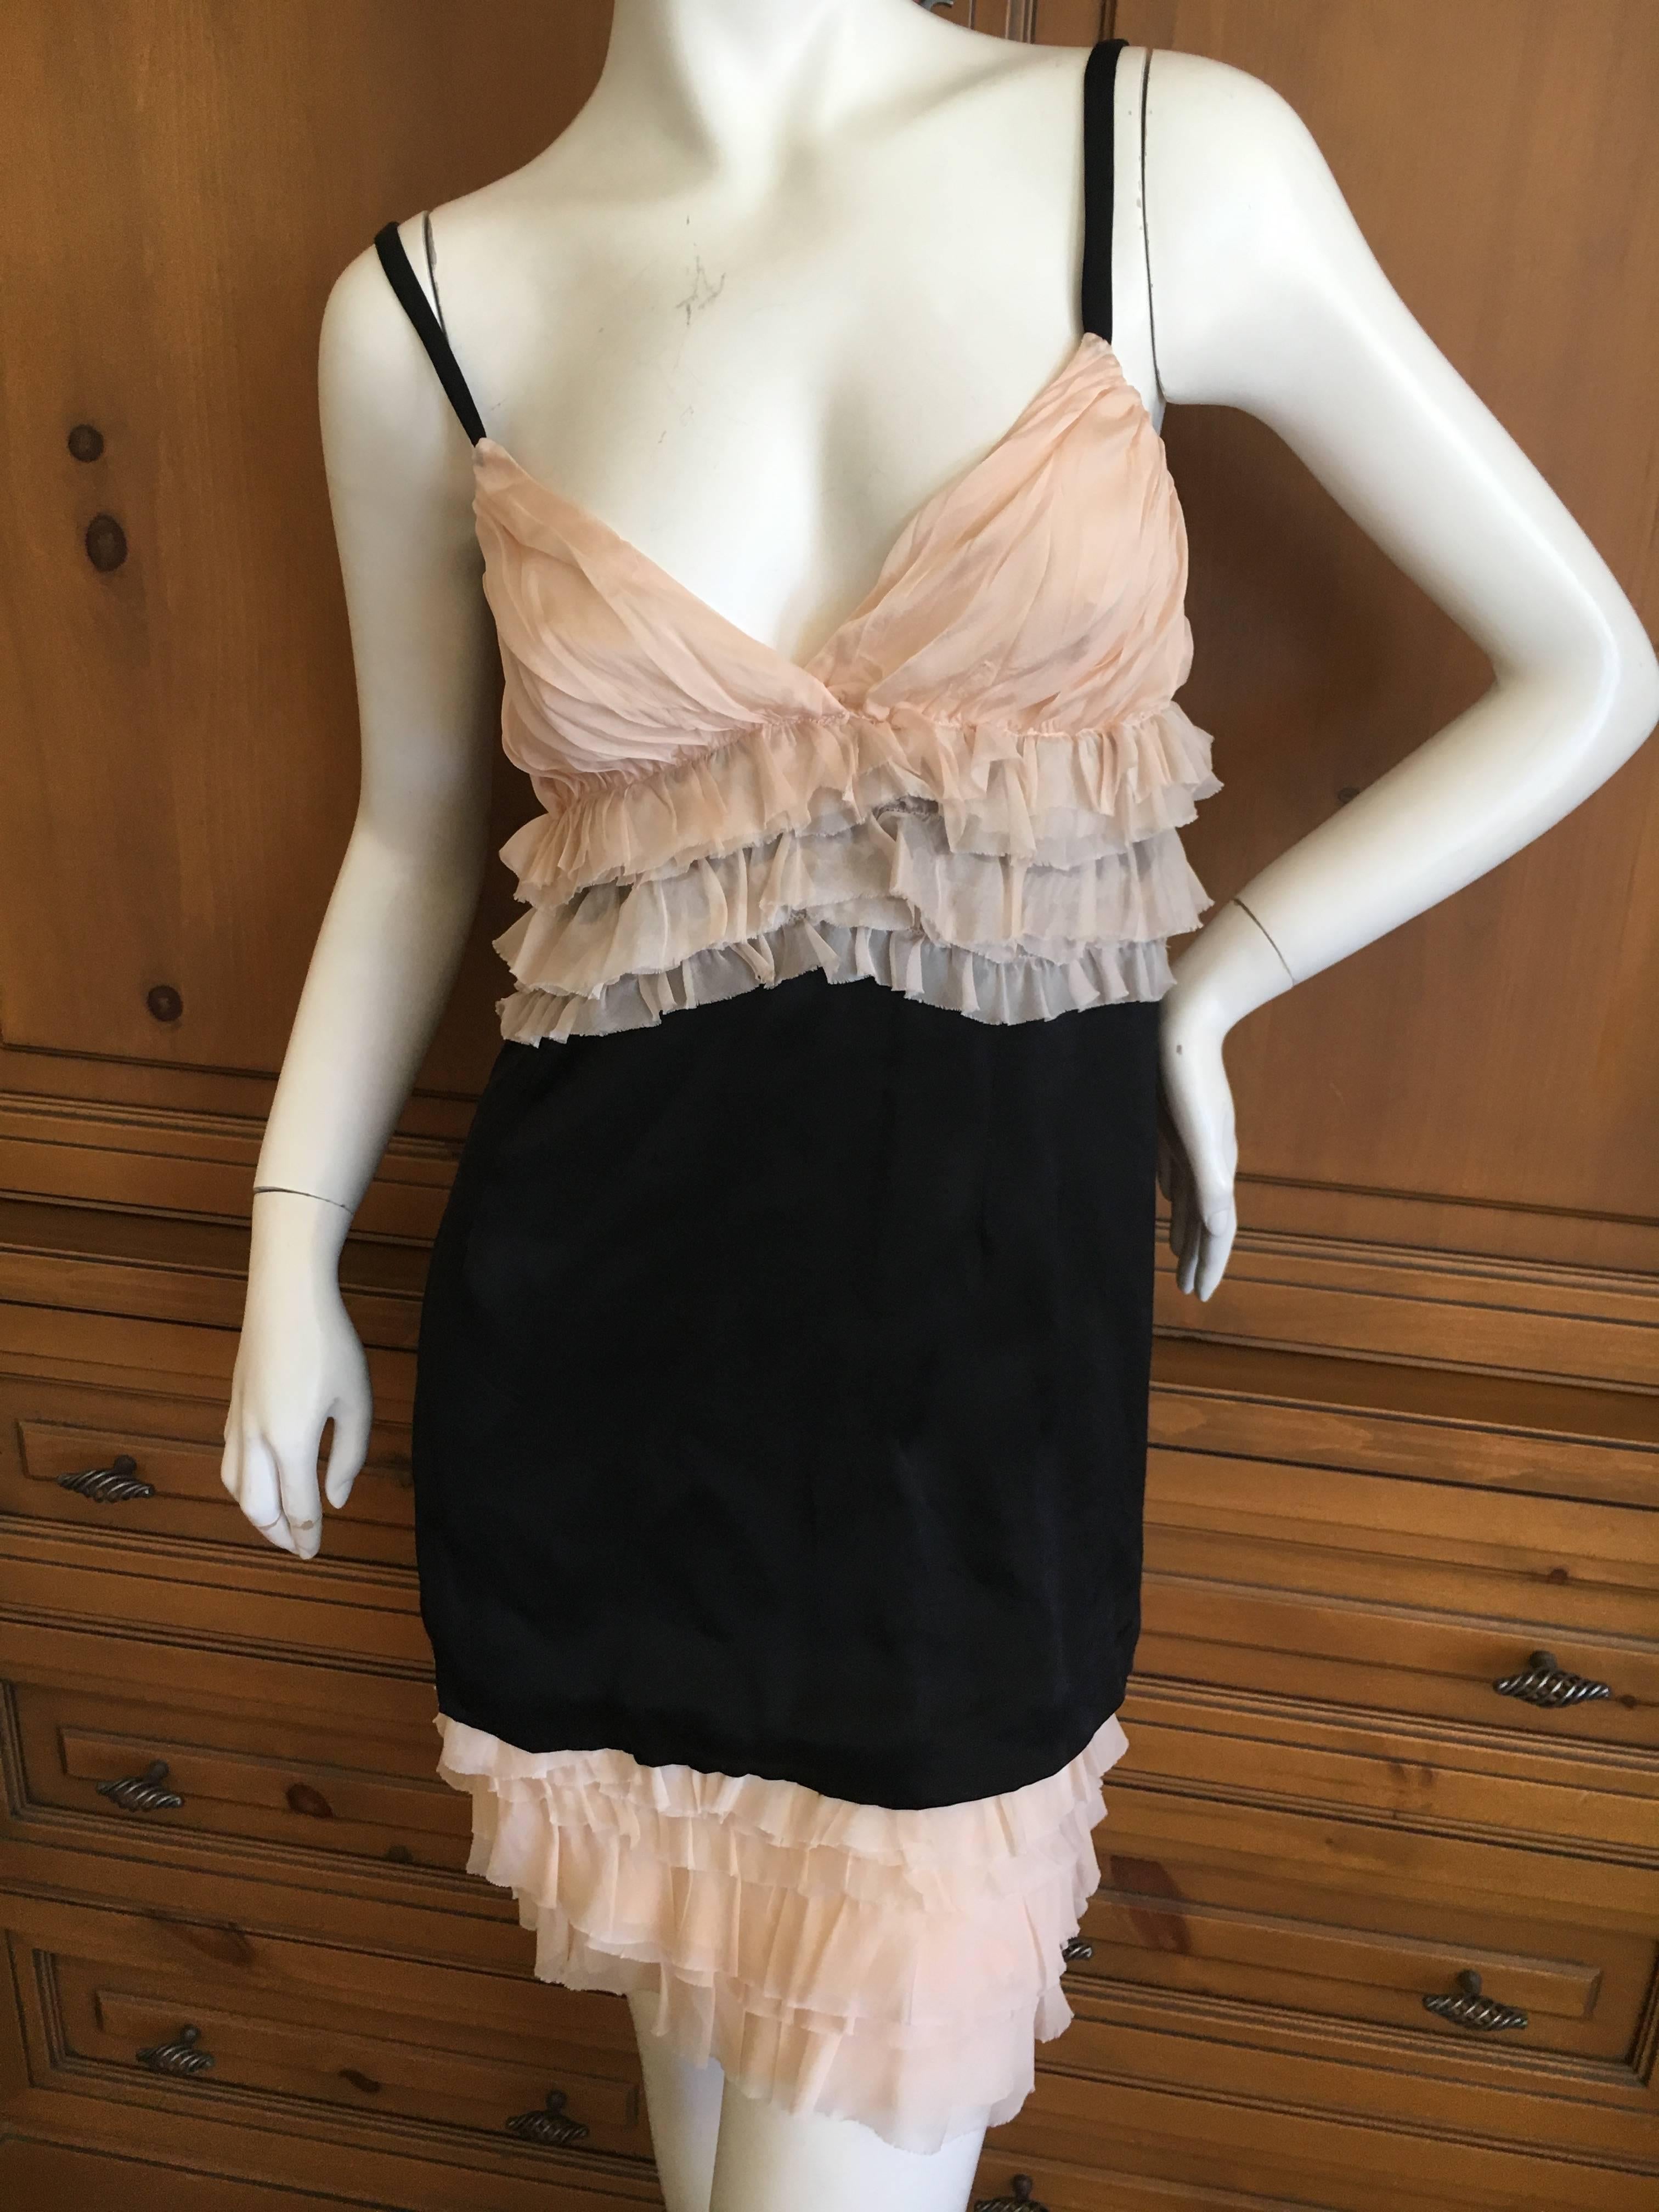 D&G Dolce & Gabbana Ruffle Black and Blush Mini Dress New with Tags In New Condition For Sale In Cloverdale, CA